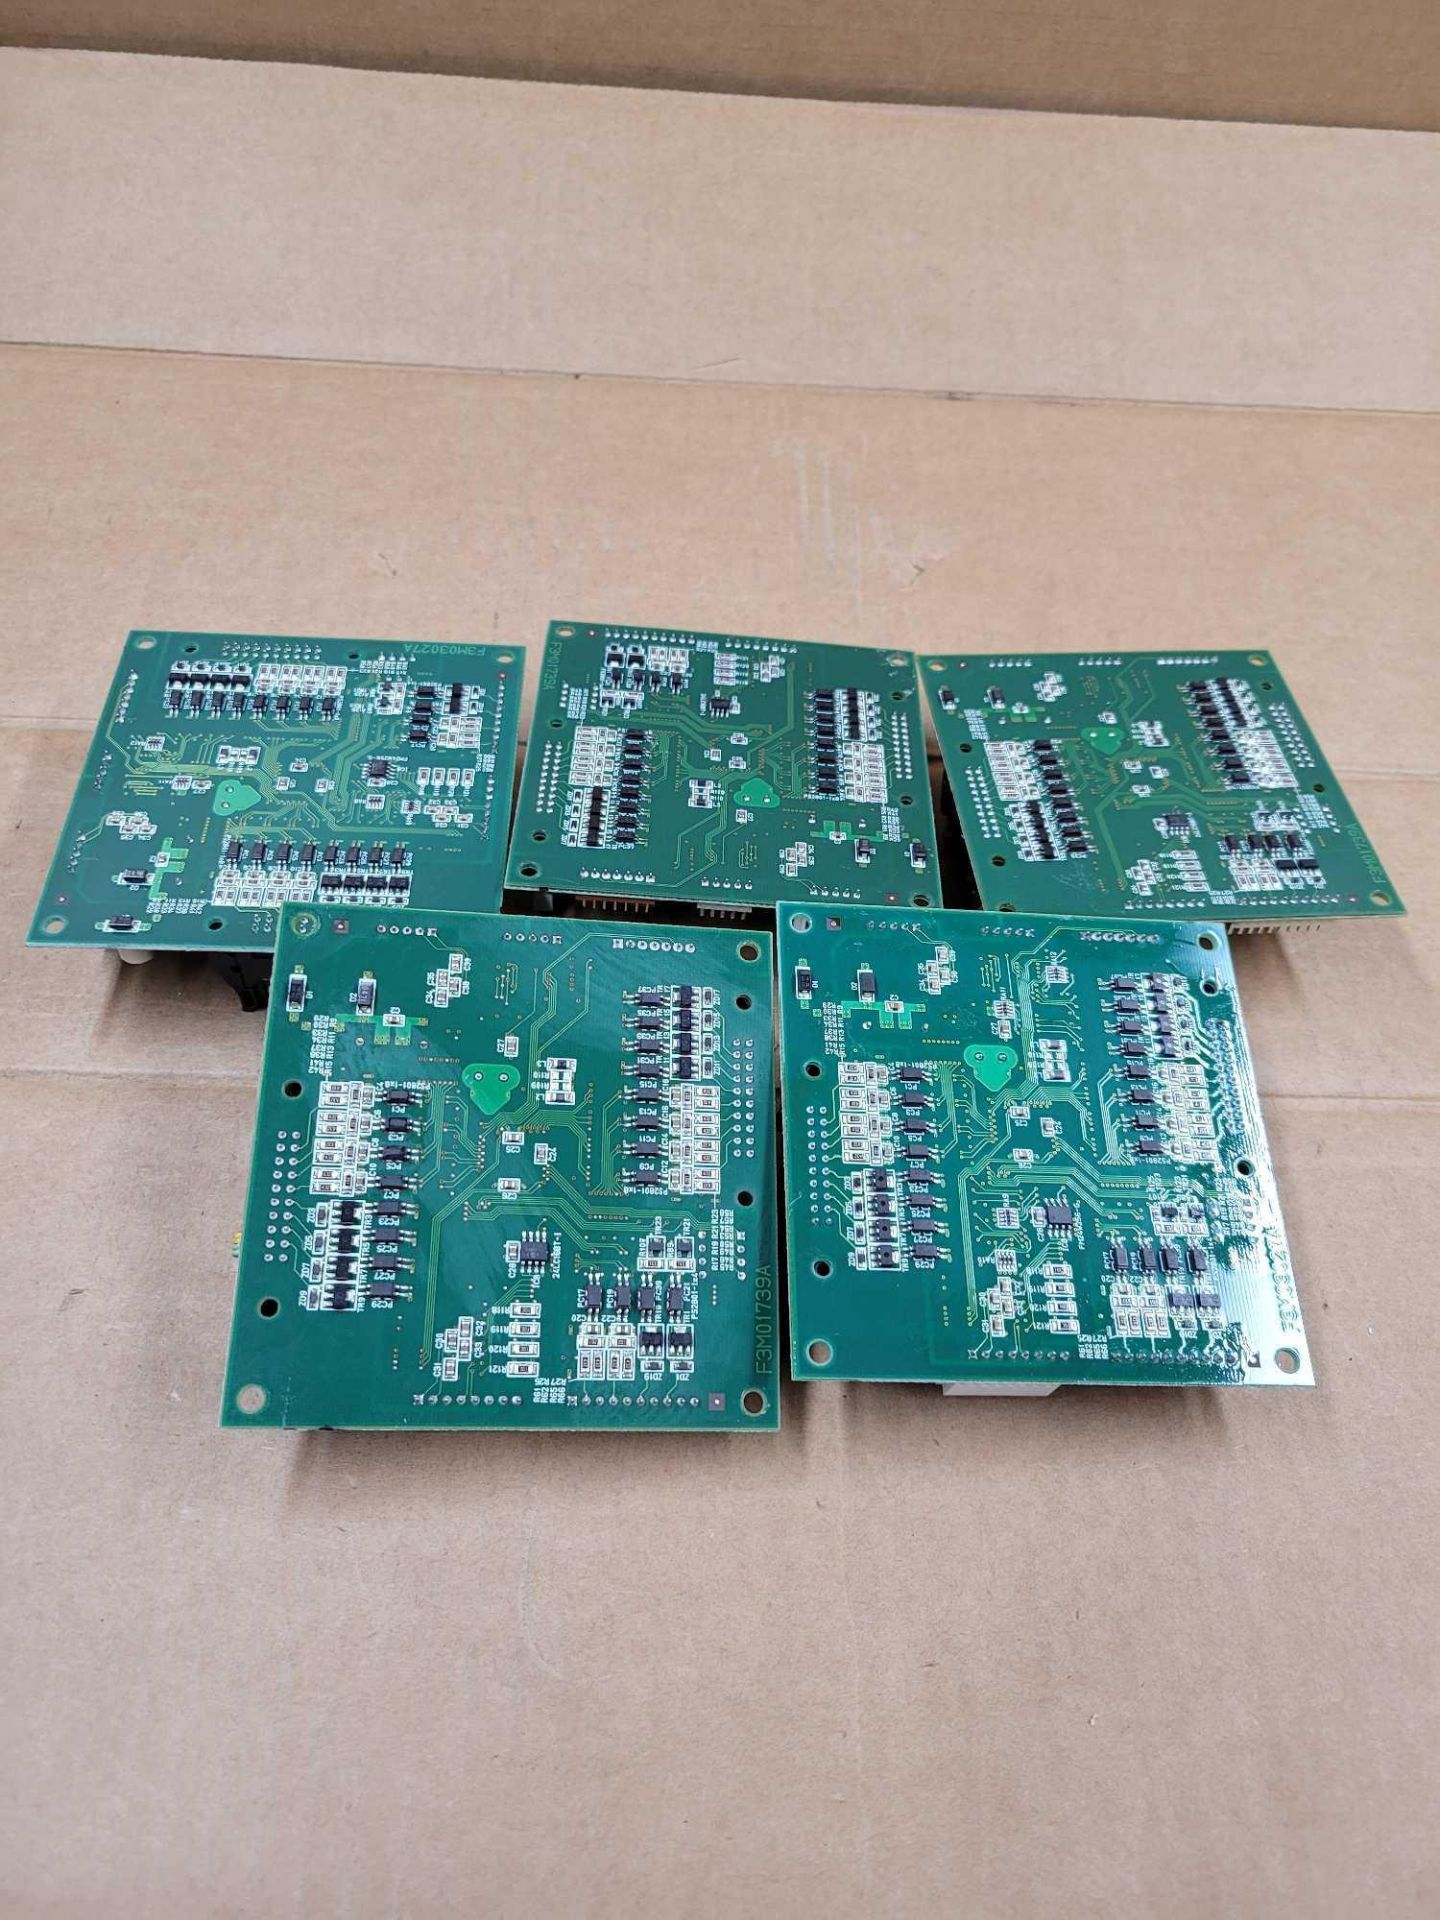 LOT OF 5 ASSORTED COSEL PCB BOARD CARD  /  (2) COSEL FCP-P07A  /  (3) FCP-P07  /  Lot Weight: 0.8 lb - Image 8 of 8